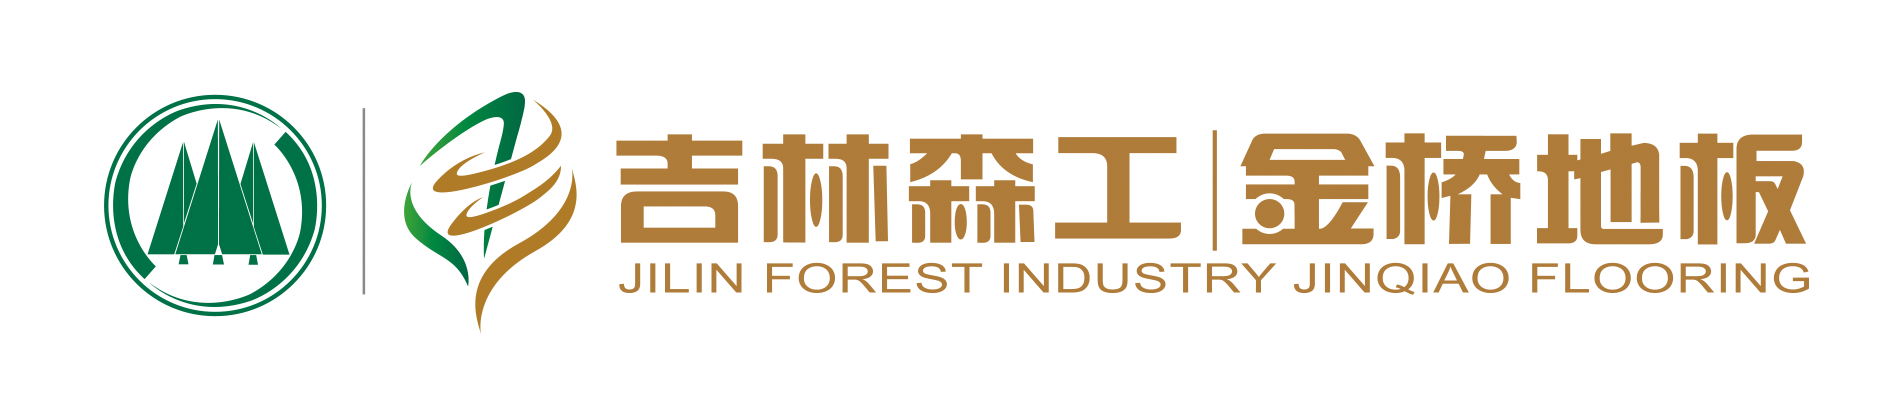 JILIN FOREST INDUSTRY JINQIAO FLOORING GROUP CO., LTD.